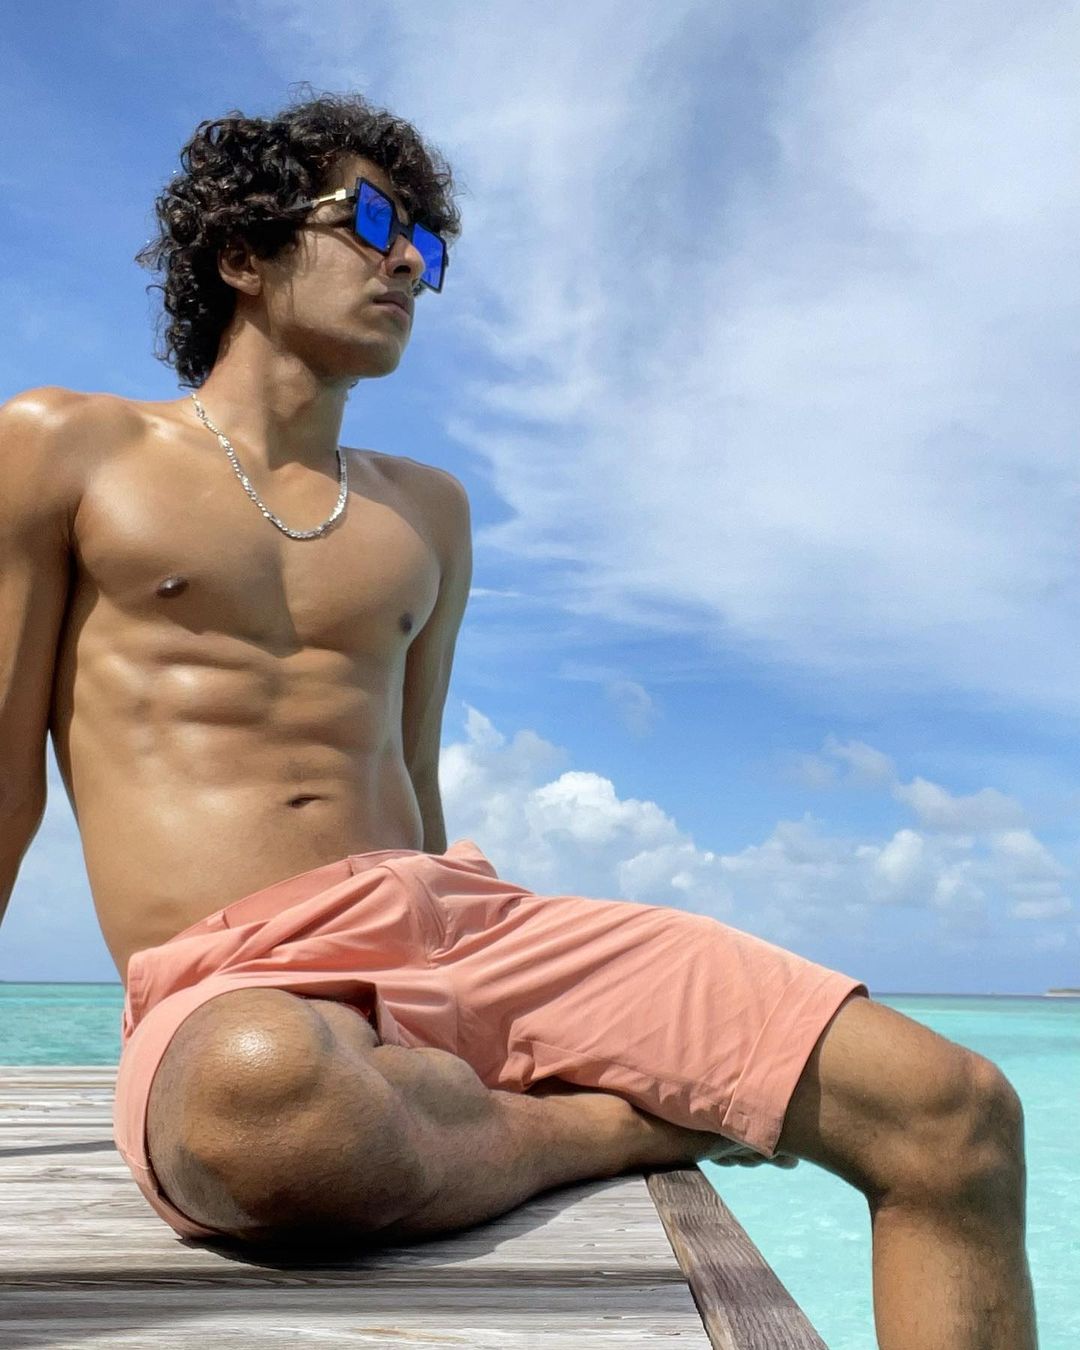 Ishaan Khatter looks cool in the shorts-only shot